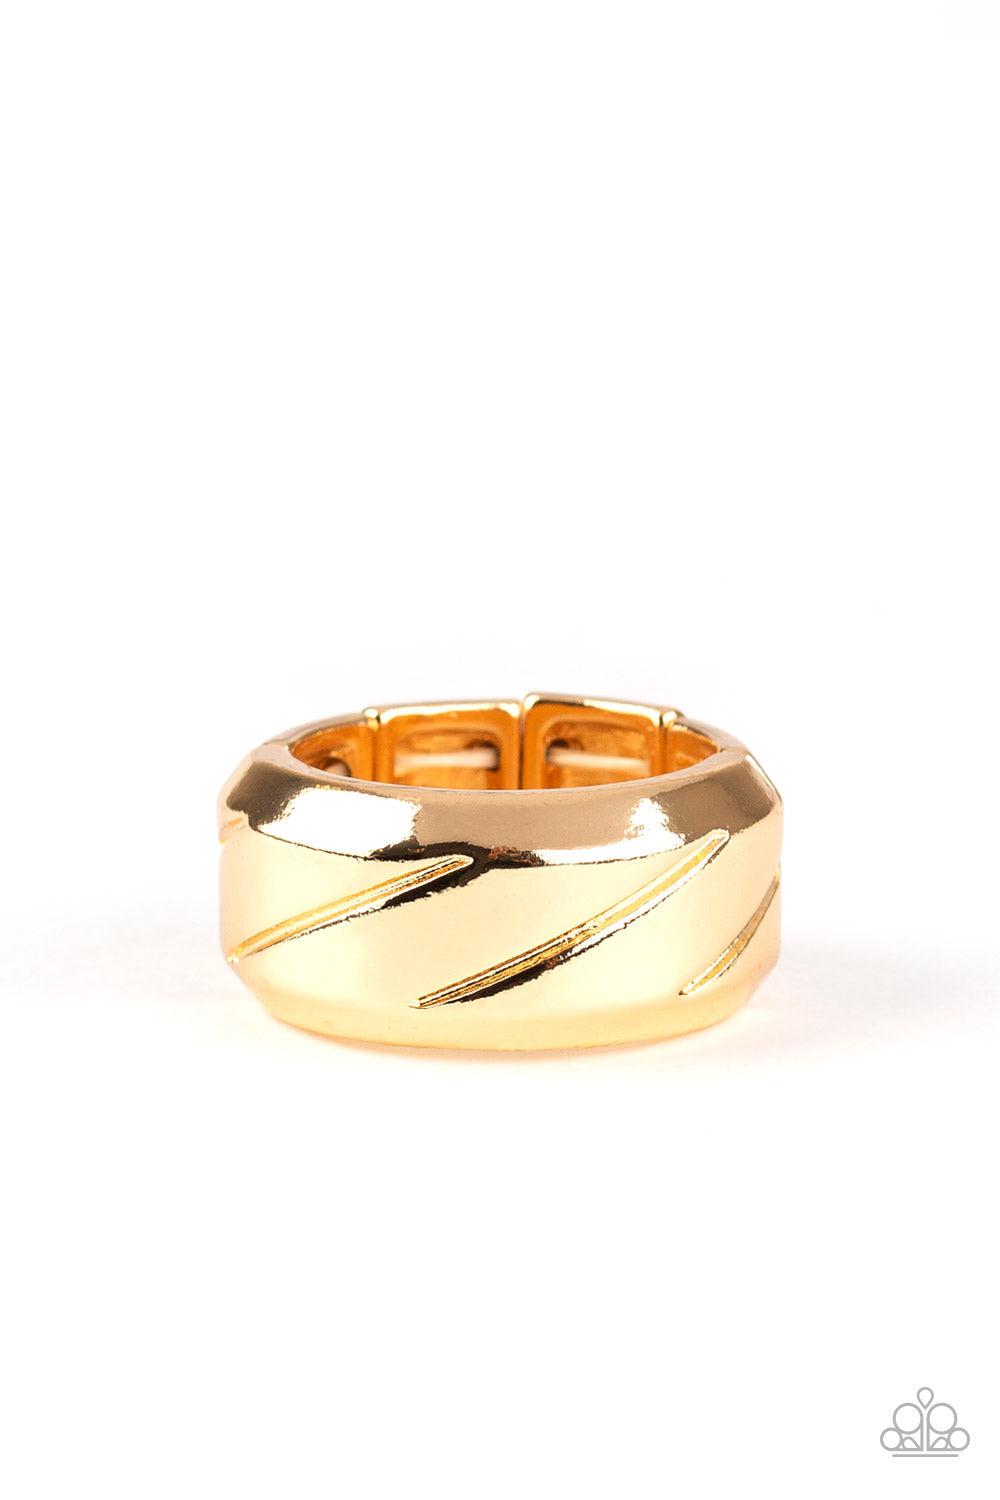 Sideswiped Men's Gold Ring - Paparazzi Accessories- lightbox - CarasShop.com - $5 Jewelry by Cara Jewels